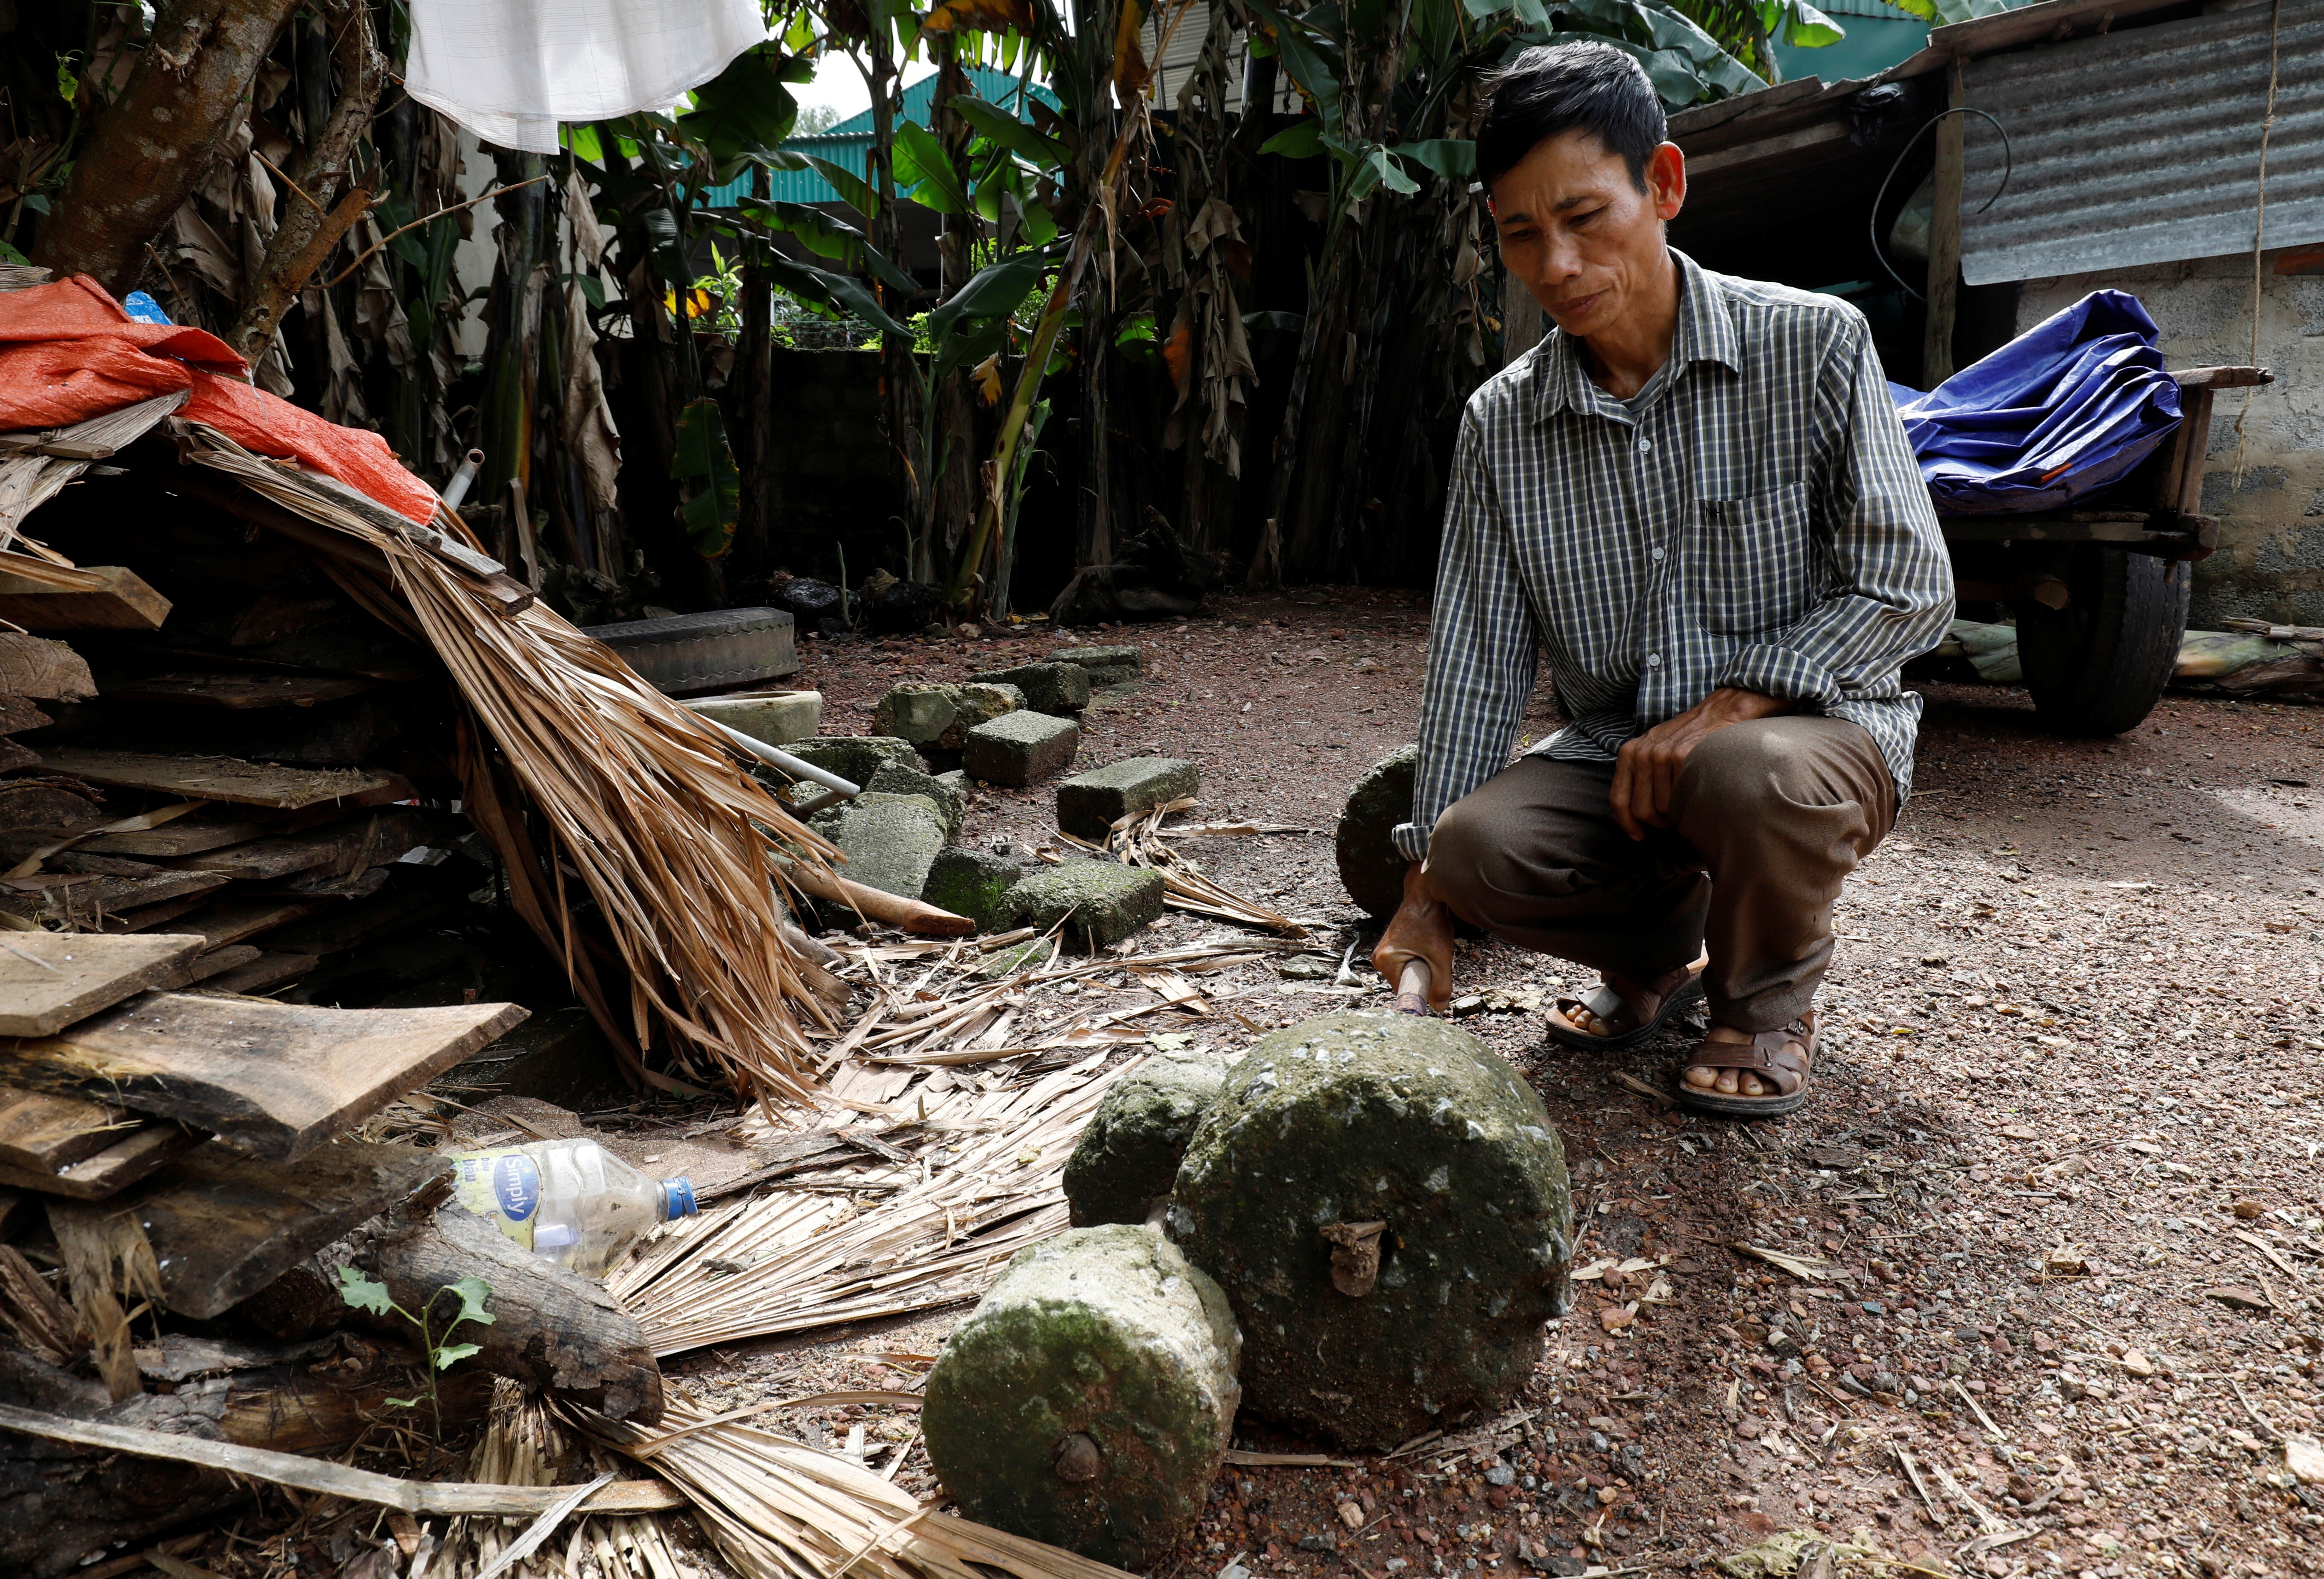 Nguyen Dinh Gia, the father of victim Nguyen Dinh Luong, kneels in his yard in Ha Tinh province, Vietnam. He said he feels sorry for the two men convicted of manslaughter as they were only trying to make a living. Photo: Reuters